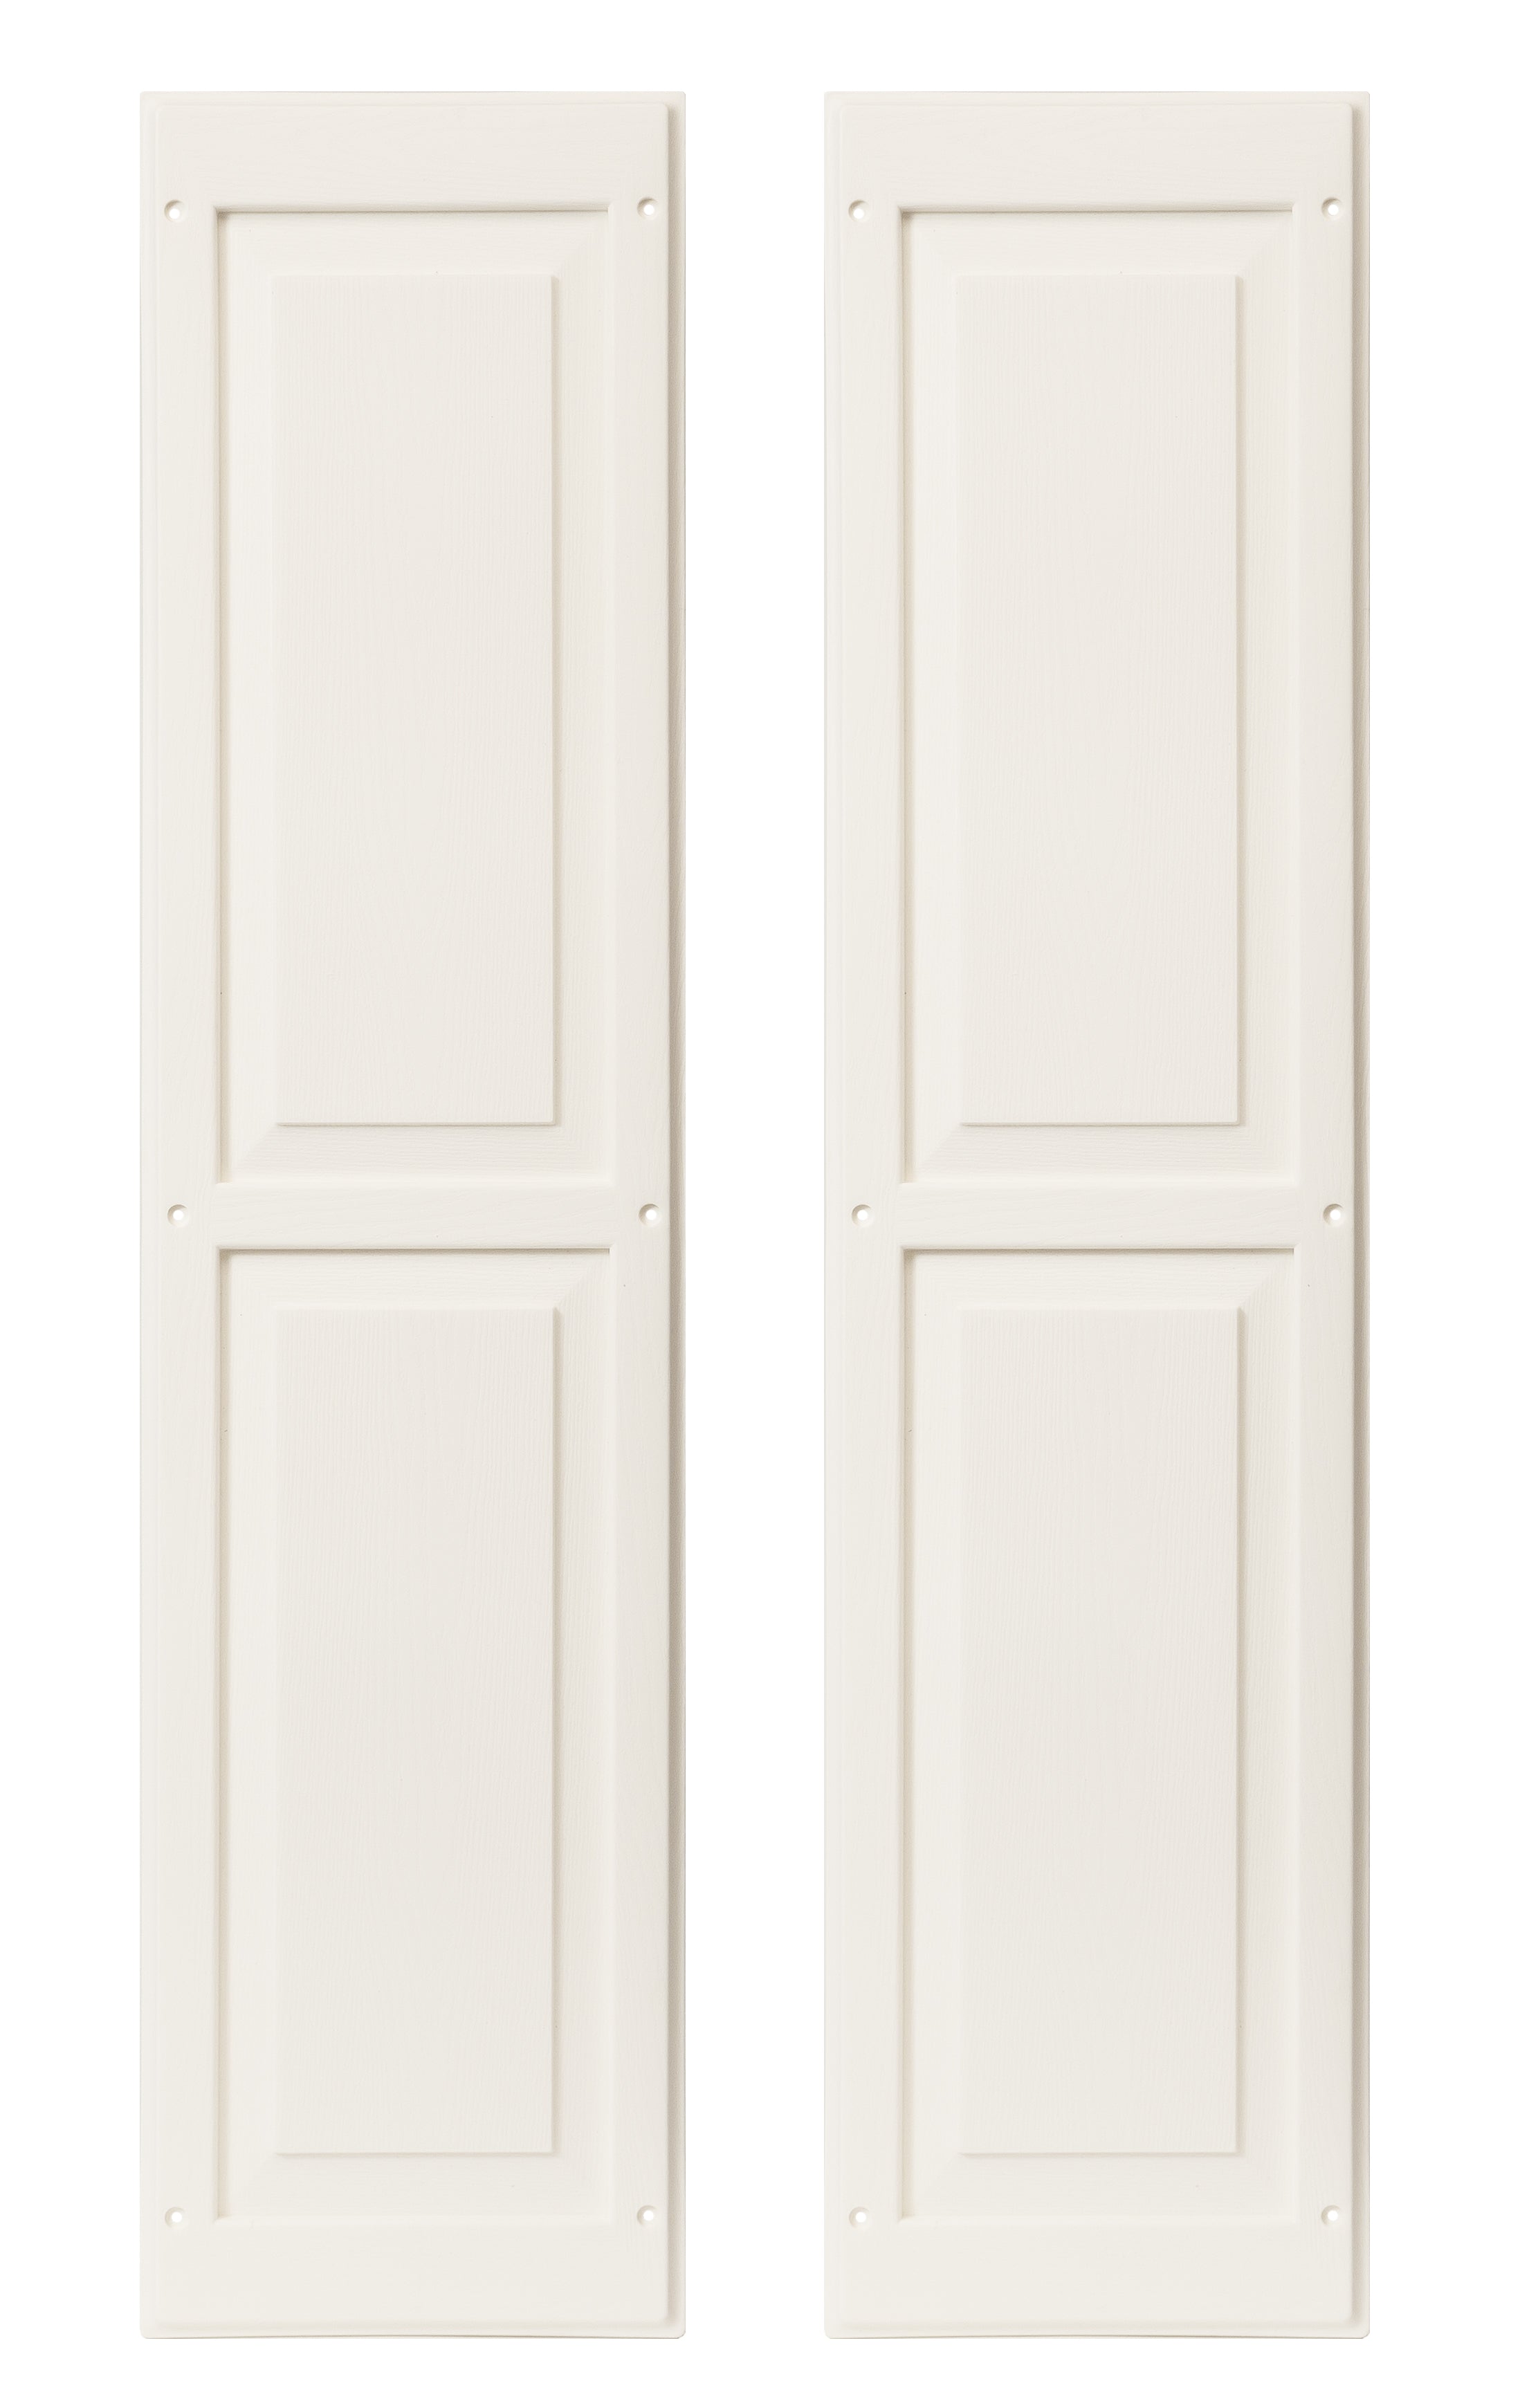 Pair of 9" W x 36" H Raised Panel White Shutters for Sheds, Playhouses, and MORE 